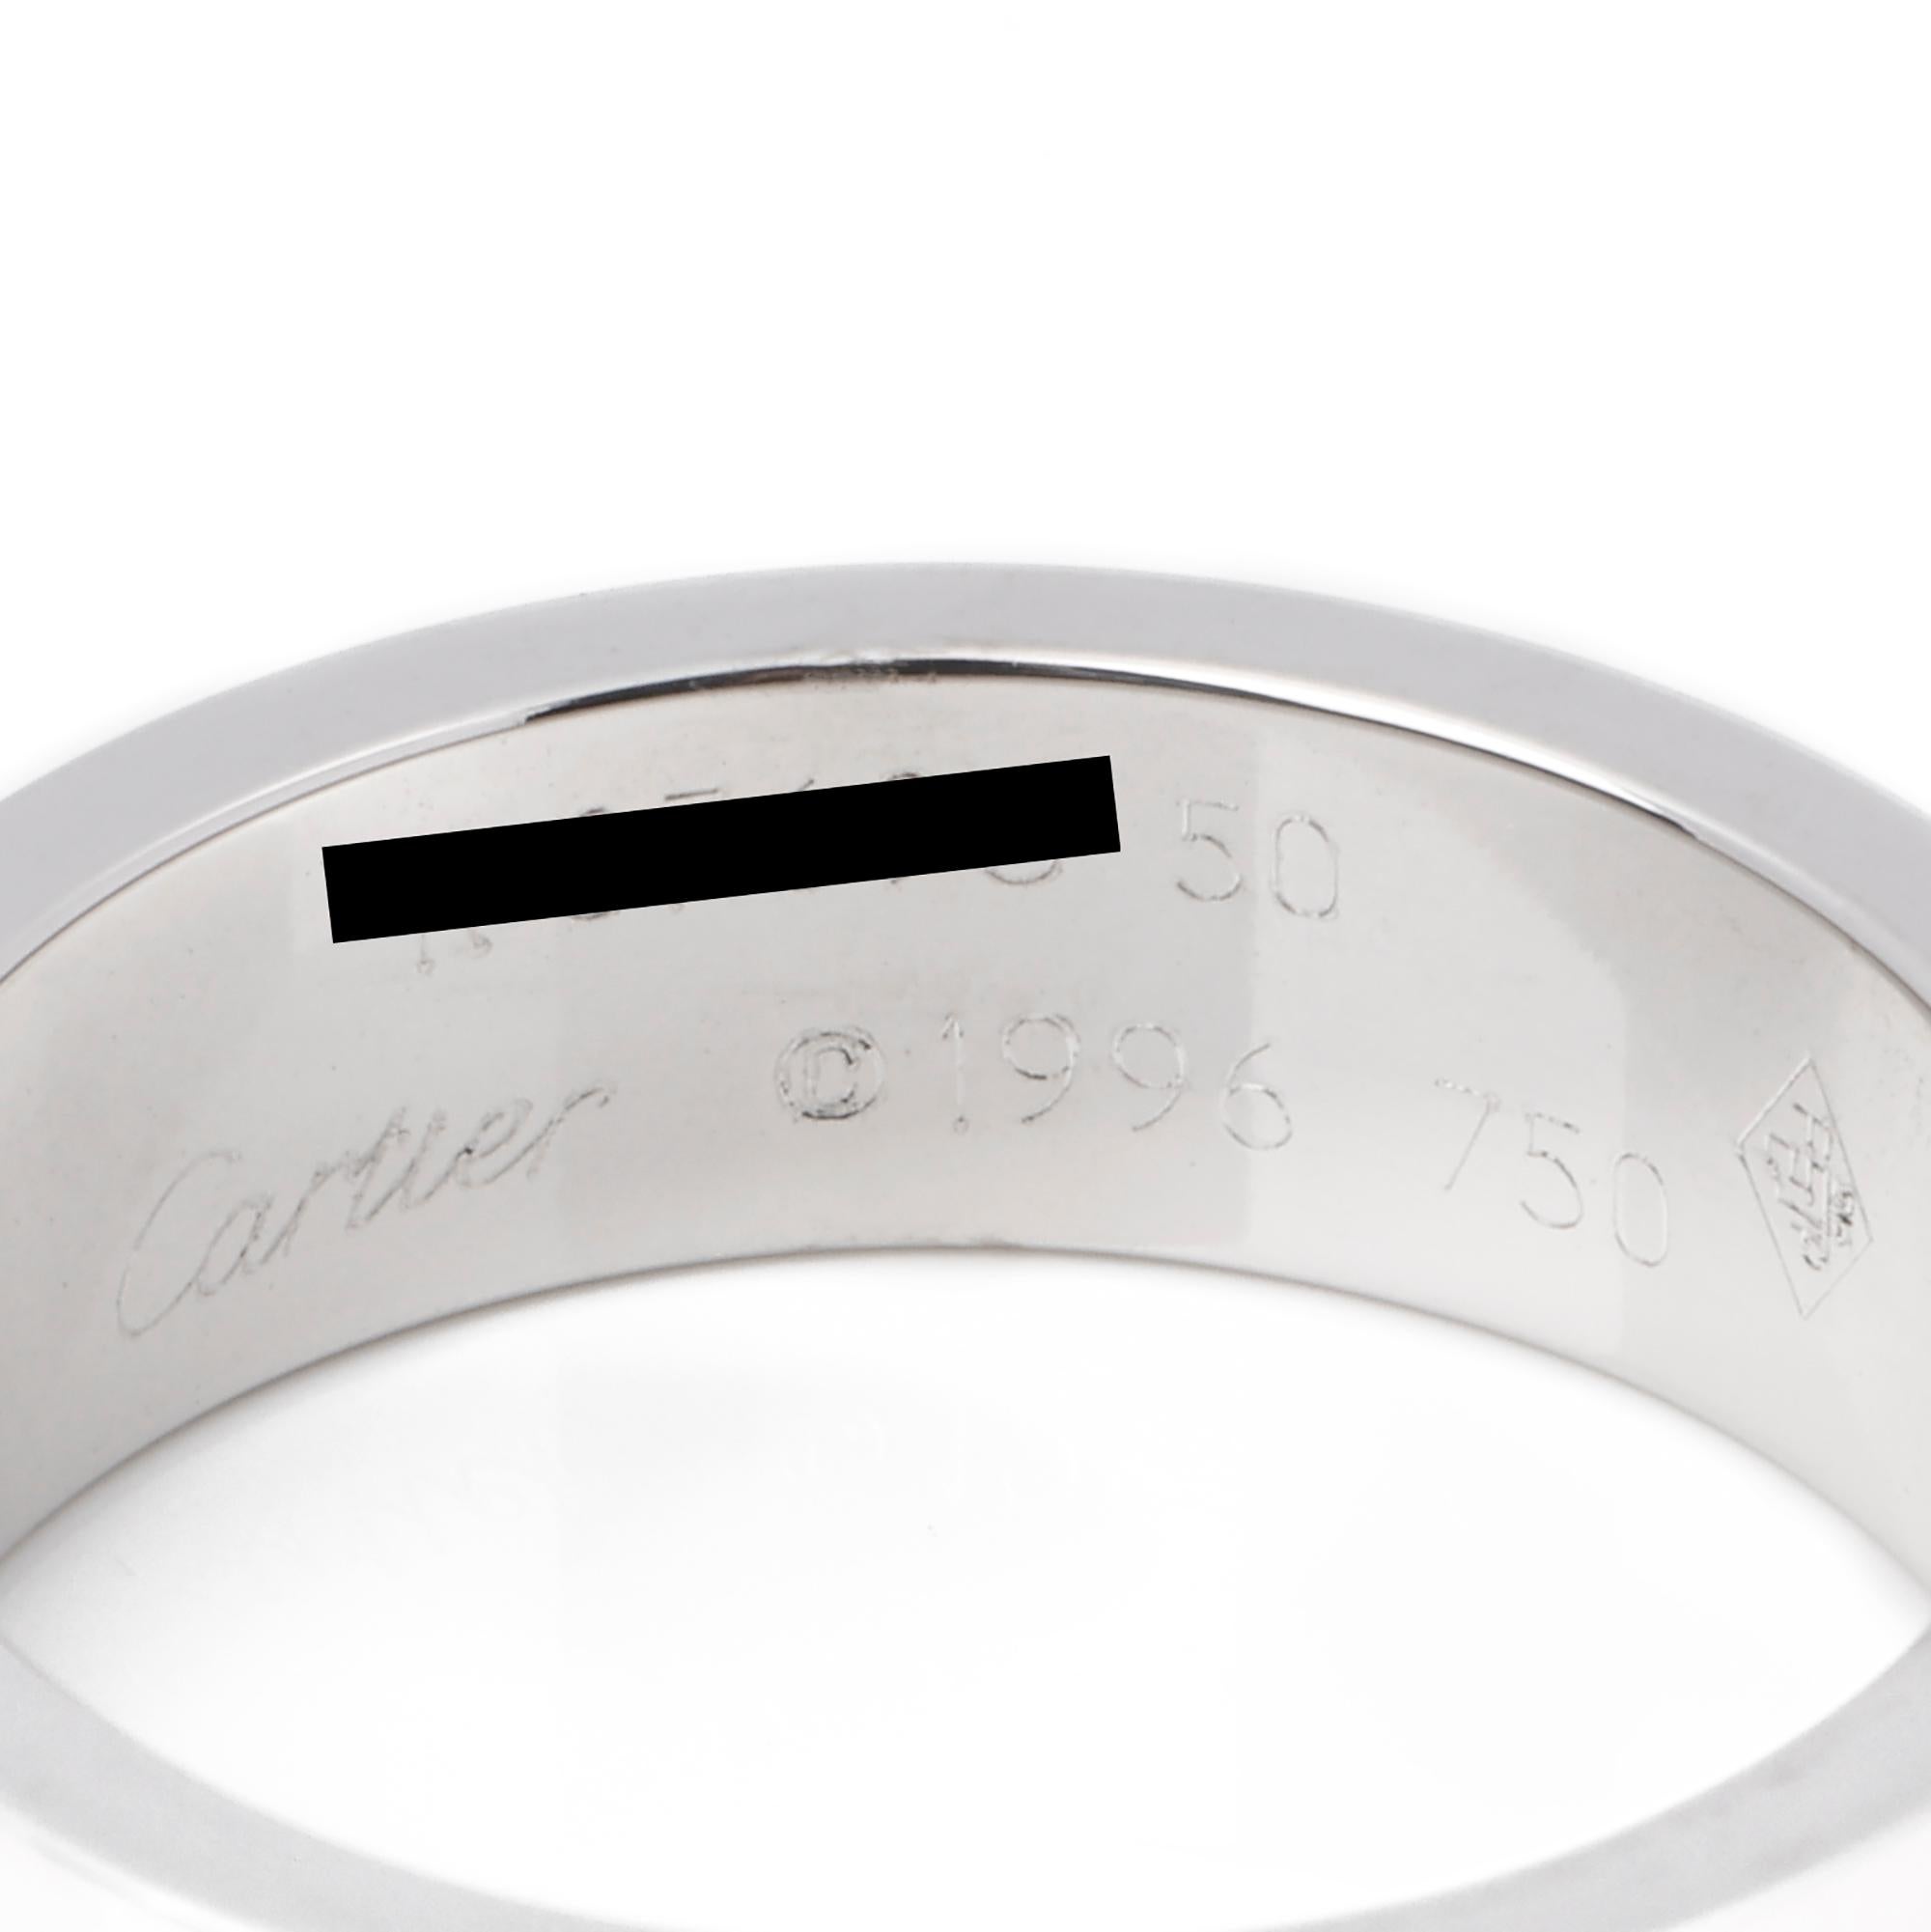 Cartier 18ct White Gold Love Band Ring

Brand Cartier
Model Love Band Ring
Product Type Ring
Serial Number K*****
Age Circa 2006
Accompanied By Cartier Certificate
Material(s) 18ct White Gold
UK Ring Size K
EU Ring Size 50
US Ring Size 5